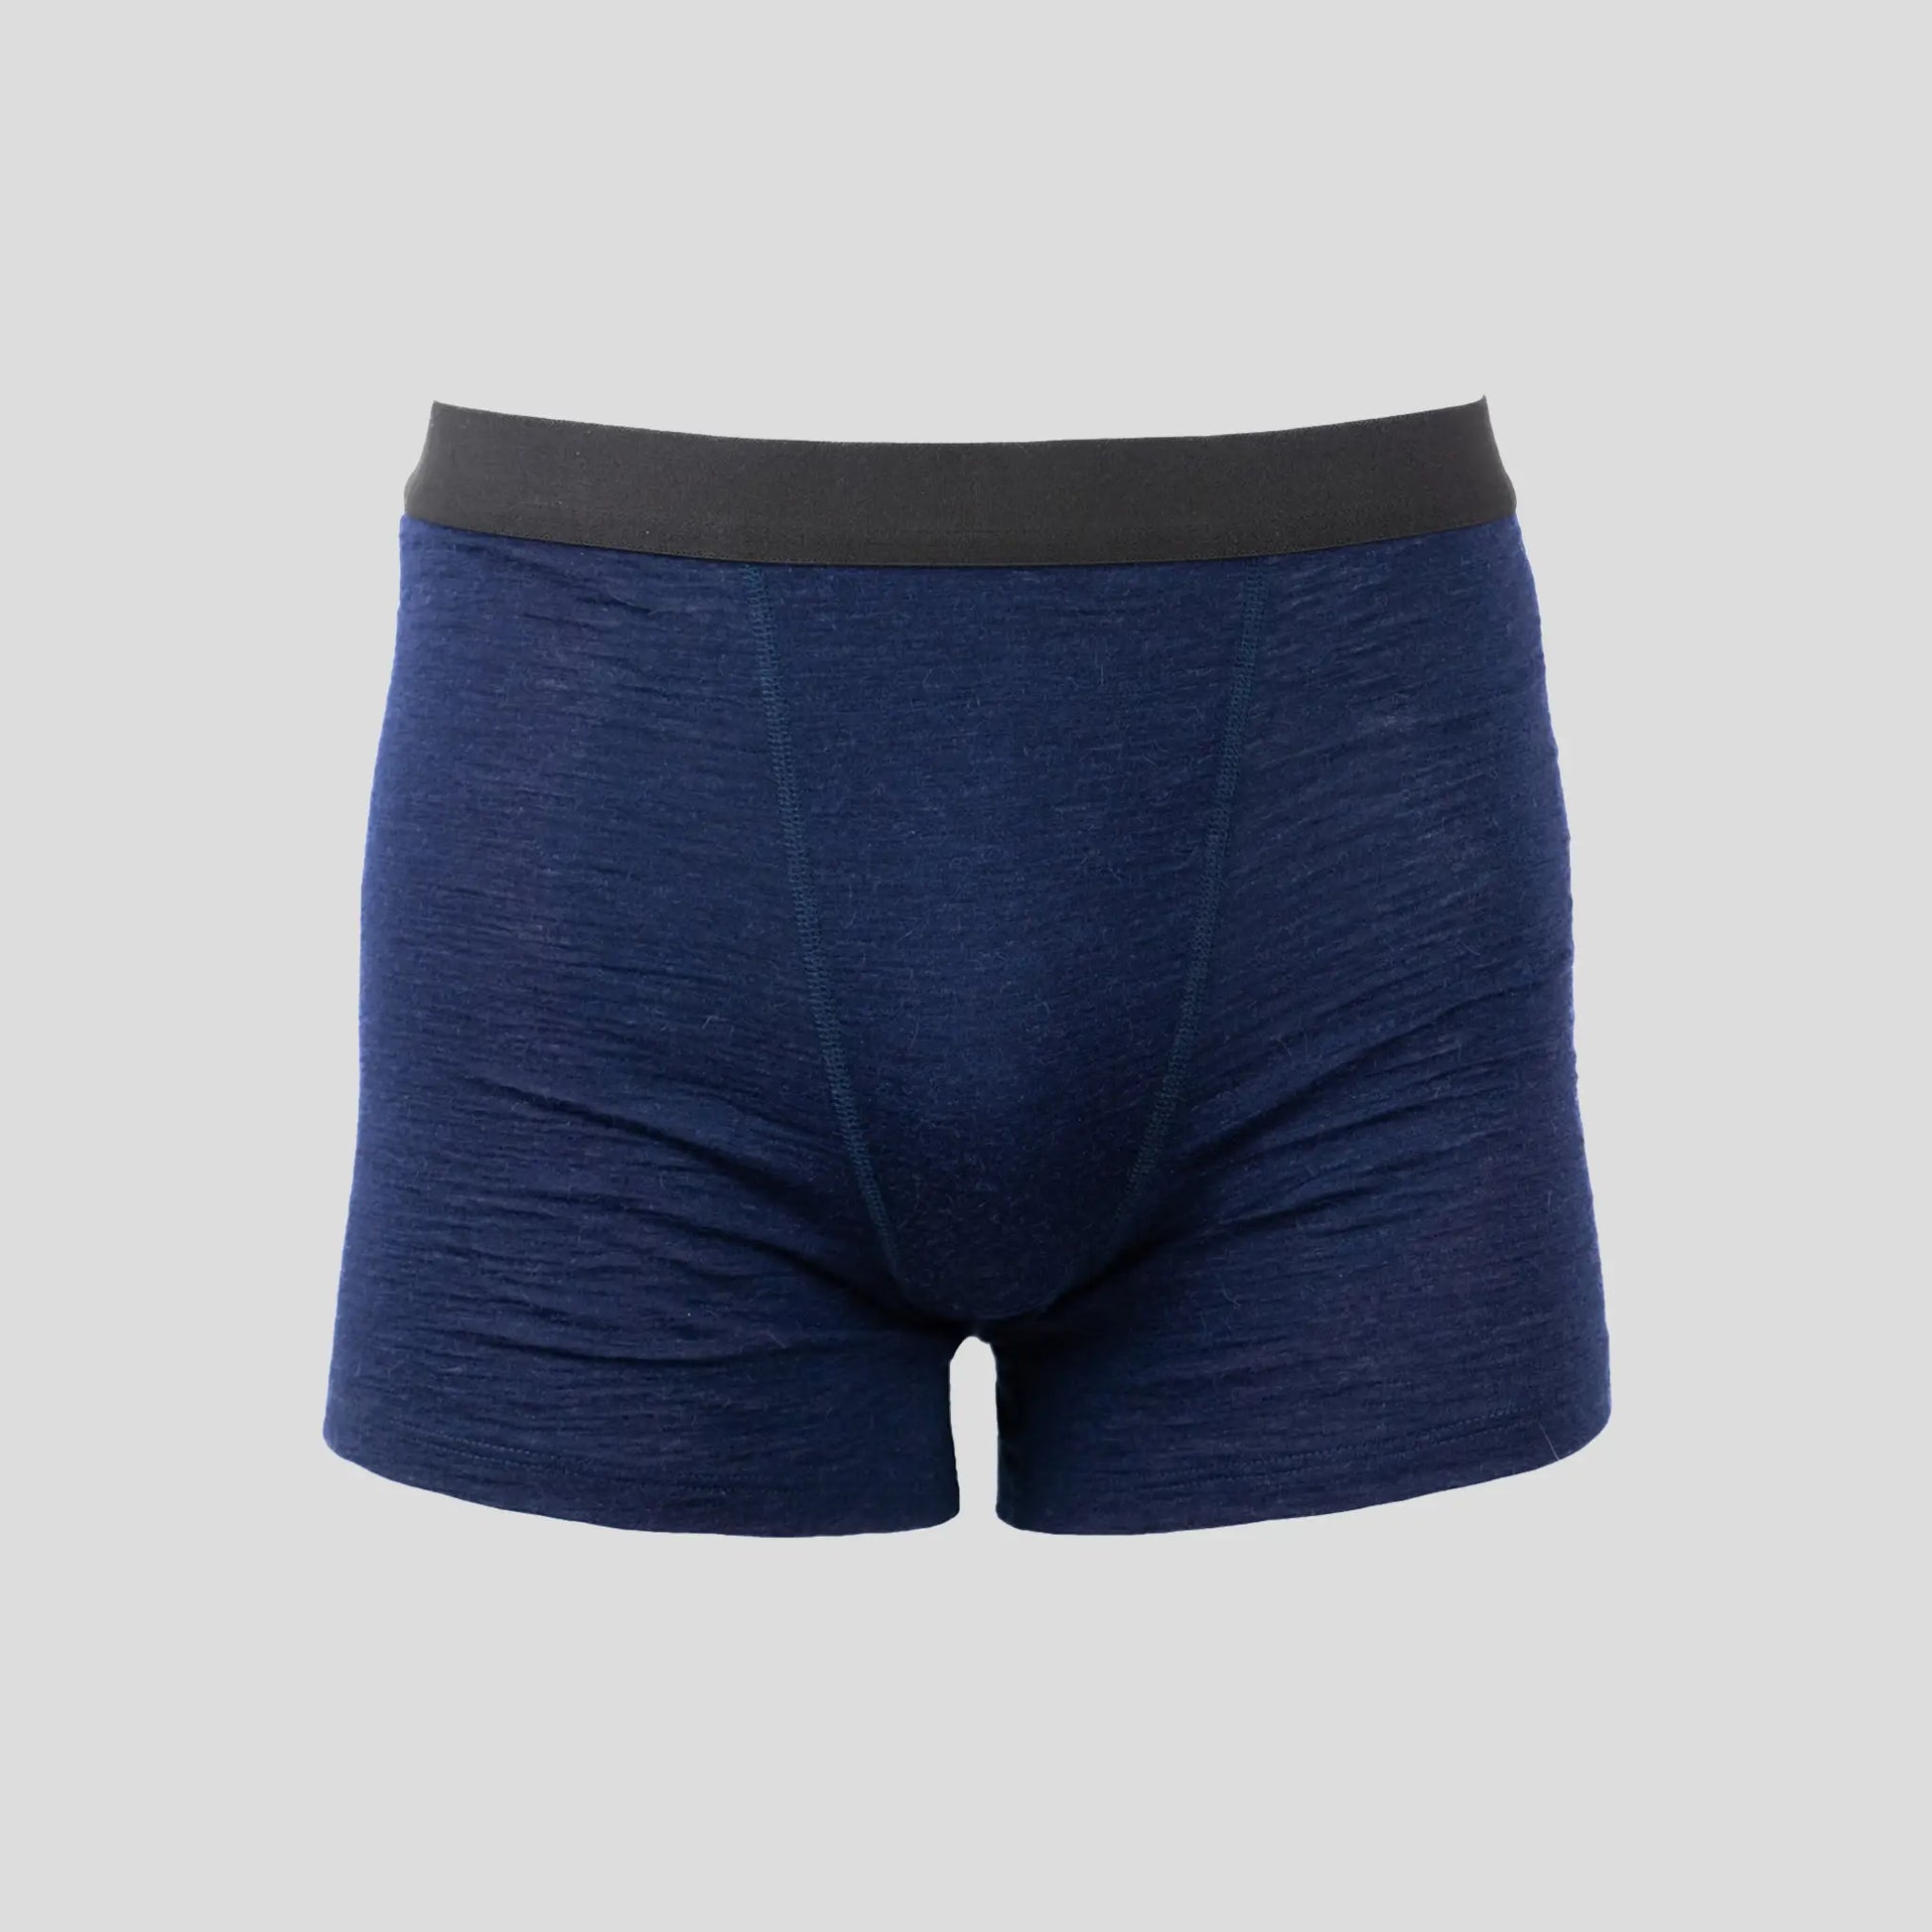 Buy F A S O 100% Cotton Trunk for Men